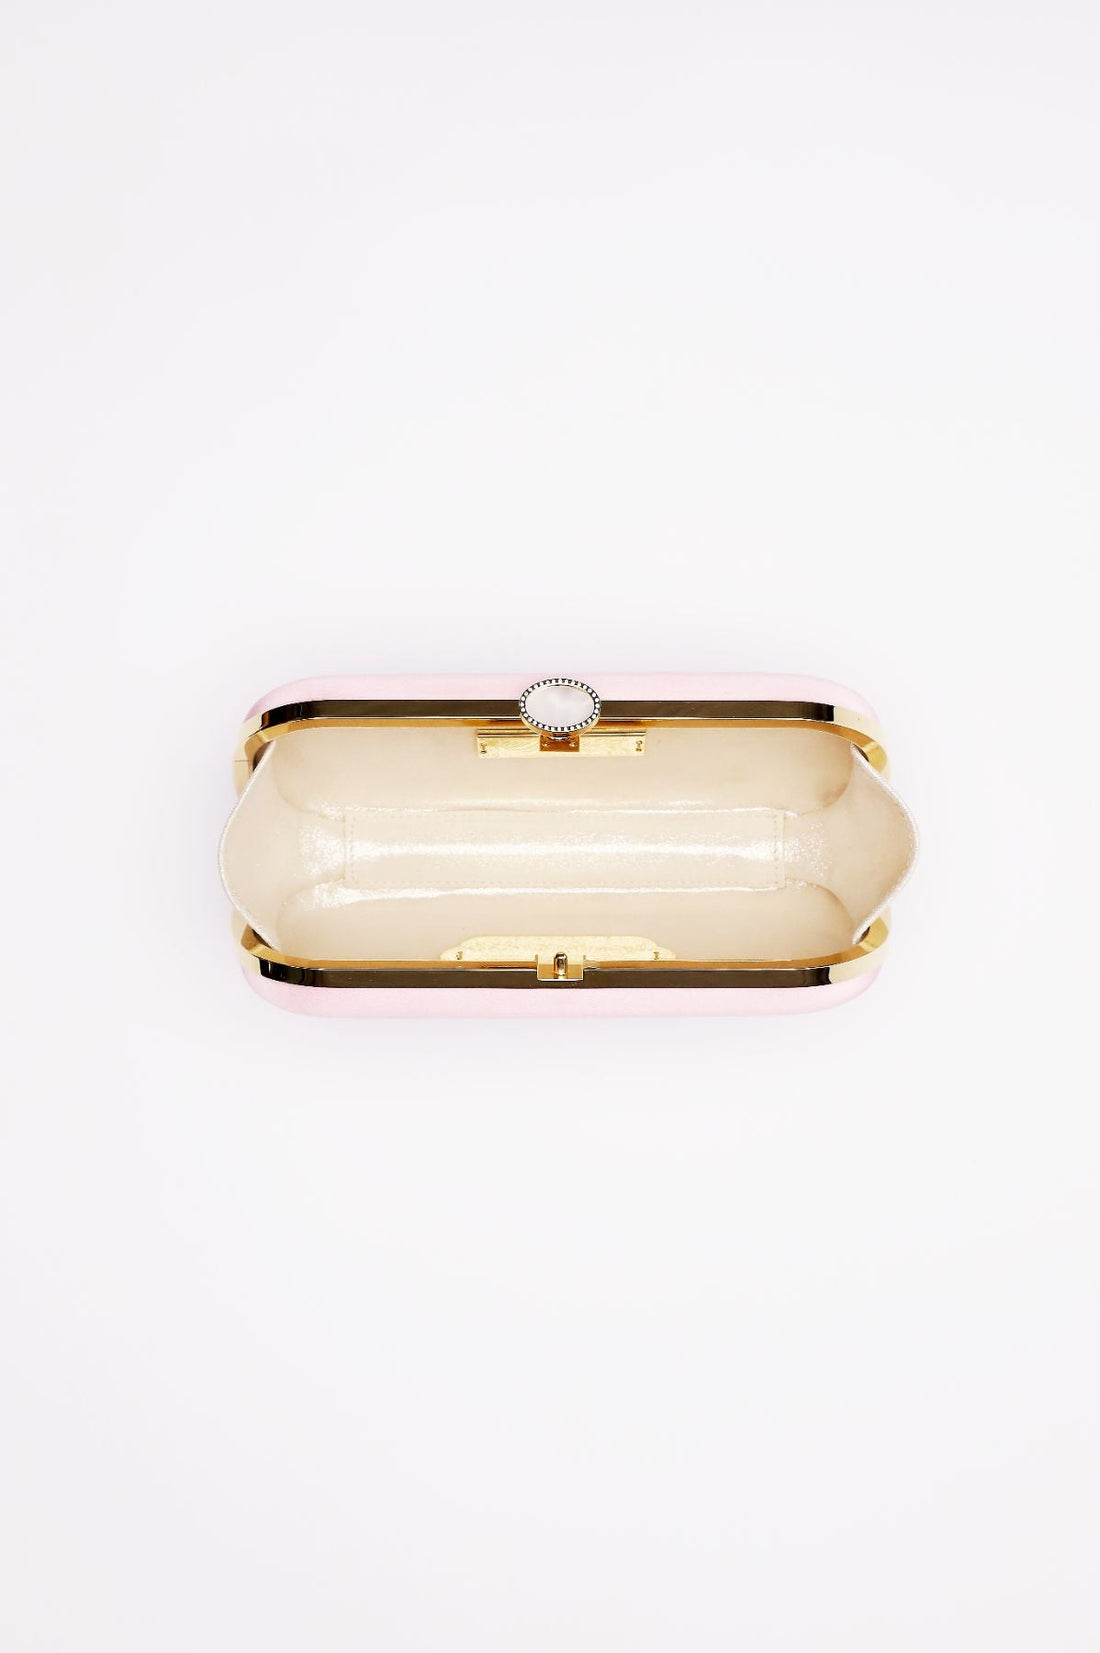 Top open view of Bella Clutch in Pink Sky satin with silver hardware frame.